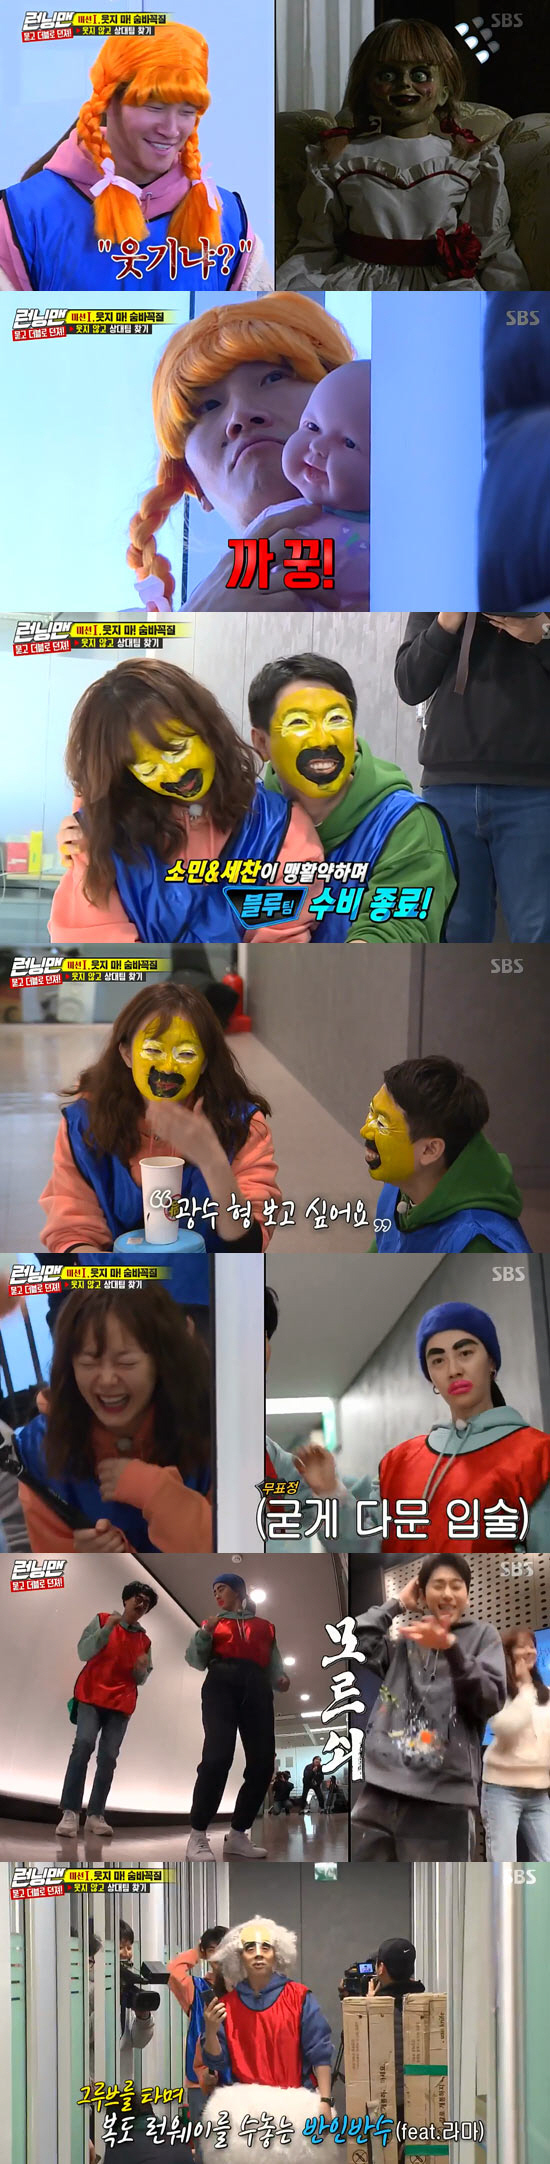 Kwangsoo, please, Mr. Kwangsoo, I miss you.On SBS Running Man broadcasted on the 8th, Disgusting to Double Jeopardy concept was a combination of a makeup show and a Hide and Seek.April Na-eun, Kim Na-hee, Kang Tae-oh, Yura entertainment prospects and four guests joined the group.The opening began with reference to Lee Kwangsoos accident news and his absence from the show.Lee Kwangsoo has been injured in his ankle and has to undergo surgery, so he can not broadcast today, said Yoo Jae-Suk. I hope he will be well and come back quickly.Haha said, Lee Kwangsoo is sorry and I call often. I also call and laugh when I go to the bathroom.The show was a love of Kwangsoo, and the members felt Lee Kwangsoos vacancy in the situation where the makeup show and various fouls were Touken Ranbu.In particular, Jeon So-min said, This is what my brother did, but I am doing it. Kwangsoo brother comes quickly.The race was divided into Blue Team (Yura Yang Se-chan, Na-eun Kim Jong-kook, Jeon So-min Kang Tae-oh), Red Team (Song Ji-hyo Ji Suk-jin, Kim Na-hee Yoo Jae-Suk, Haha) and started Tossing to Double Jeopardy Race.The members were given the upgraded version of the Do not Laugh mission, Do not Laugh Hide and Seek mission, challenging a new mission that combines Makeup Show and Hide and Seek.I look for members who are hiding in a makeup, but I have to endure laughter when I find a member.All-time makeup bursts, especially Kim Jong-kook, who wore an orange wig and turned into an enabel, shocking her with a baby doll.When I followed the music of Love and Soul, Yang Se-chan and Jeon So-min showed me a passionate melody by parodying the movie Love and Soul with a light blue makeup on their faces.The top hidden card for the Yoo Jae-Suk team was Dam Ji-hyo.Song Ji-hyo, who has a nickname of Dam Ji-hyo because he lives in the world and lives with the usual world, danced to Ji Suk-jin and No Song.The fact that I do not actually know this song and dance made the members more funny.Song Ji-hyo came out to pay attention to fashion on the day, but he used the retro-feeling hair band that was criticized by everyone as it was, and laughed at the members.Dam Ji-hyo emerged as an ace of Do not Laugh Hide and Seek on this day, and Jeon So-min laughed and cried, What is going on?Why do you do what you do not do? I was really worried and laughed.The members who finished the dressing mission accumulated the prize money by throwing dice with their respective couples.Yura and Yang Se-chan, who succeeded in commissioning the dice, continued to rank first in the middle with 80,000 won.Following the second mission Cards crash, the final mission was Battle with When King Cheolbong met the quiz king.While one person hangs on the iron rod, another team member must set the initial quiz in a short time.All missions ended with Taos sick man Horan in the four-character quiz, with the final winner being covered by the final dice throw.The Kang Tae-oh Jeon So-min couple continued to chase the dice to the chin, but the final win was won by Yura and Yang Se-chan.The last place was won by a Ji Suk-jin Song Ji-hyo couple as Hahas counterattack succeeded; only 13 million dice were avoided, with one coming out from Ji Suk-jins pooch-hand performance.Yura and Yang Se-chan, who won the final, were happy to receive a Hanwoo set as a gift; Yura was delighted, saying, I like Hanwoo, so my fan club name is marbling.Yoo Jae-Suk said, I wish you a quick return to Lee Kwangsoo. I hope you will return soon, but I will return while watching Lee Kwangsoos body condition.